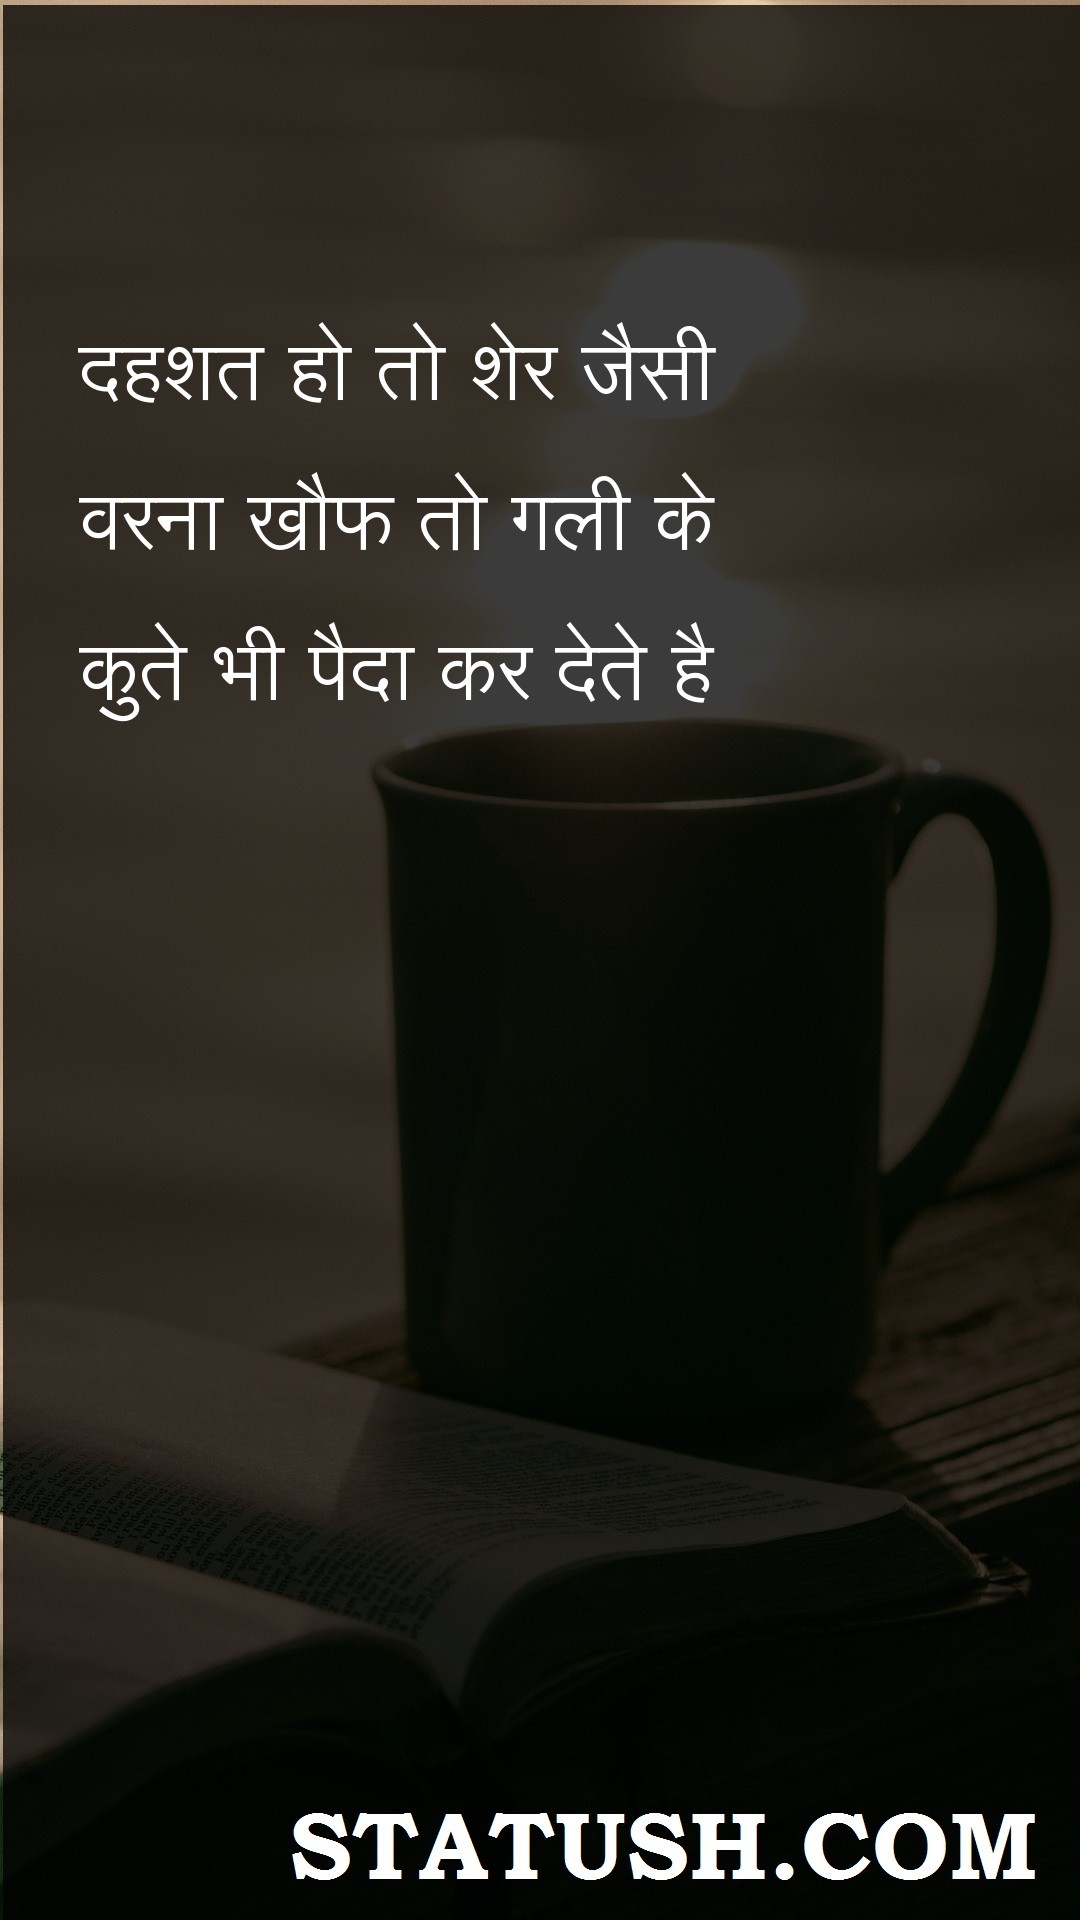 If you are frightened - Hindi Quotes at statush.com